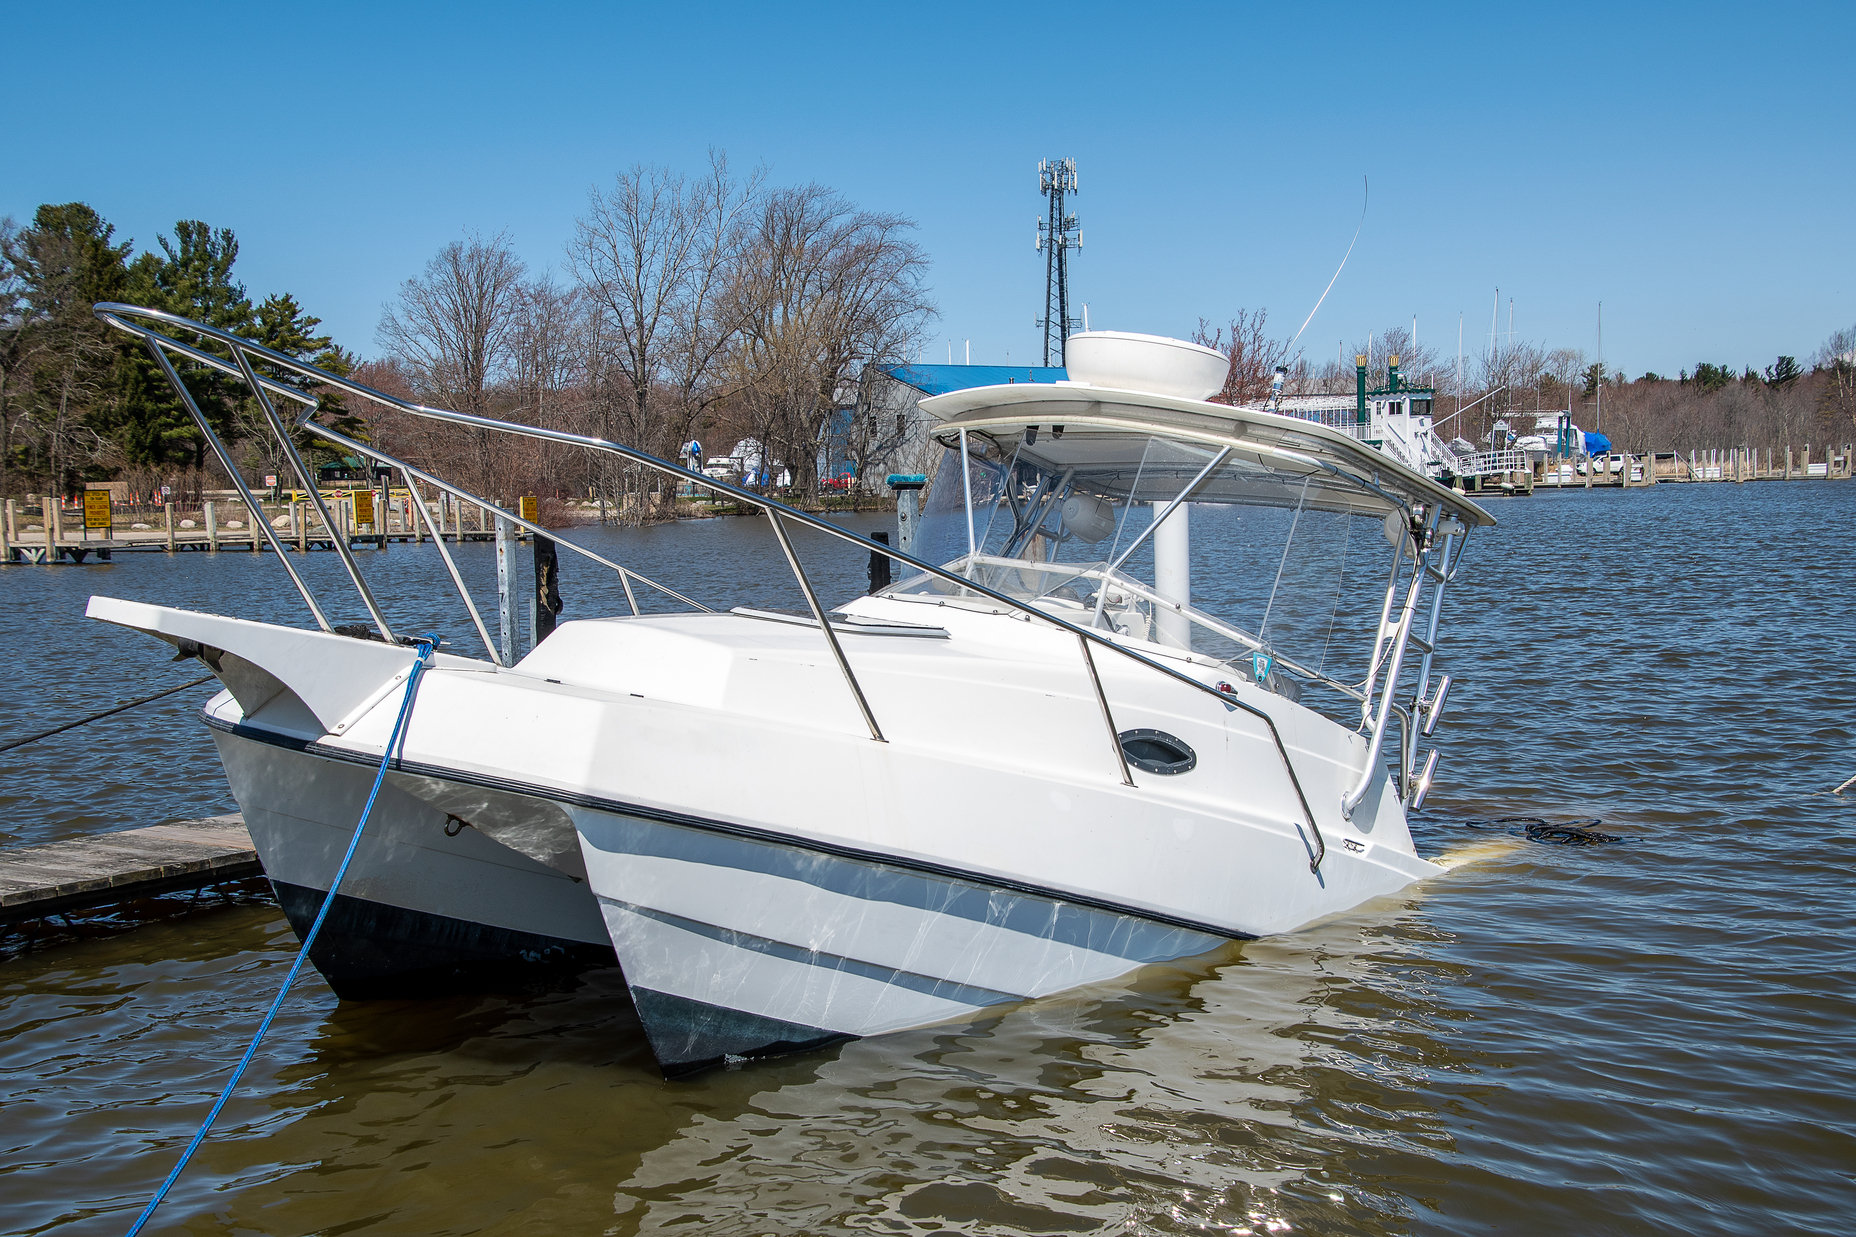 Boat Buyers Beware: 10 Hidden Problems to Look For in Used Boats - boats.com